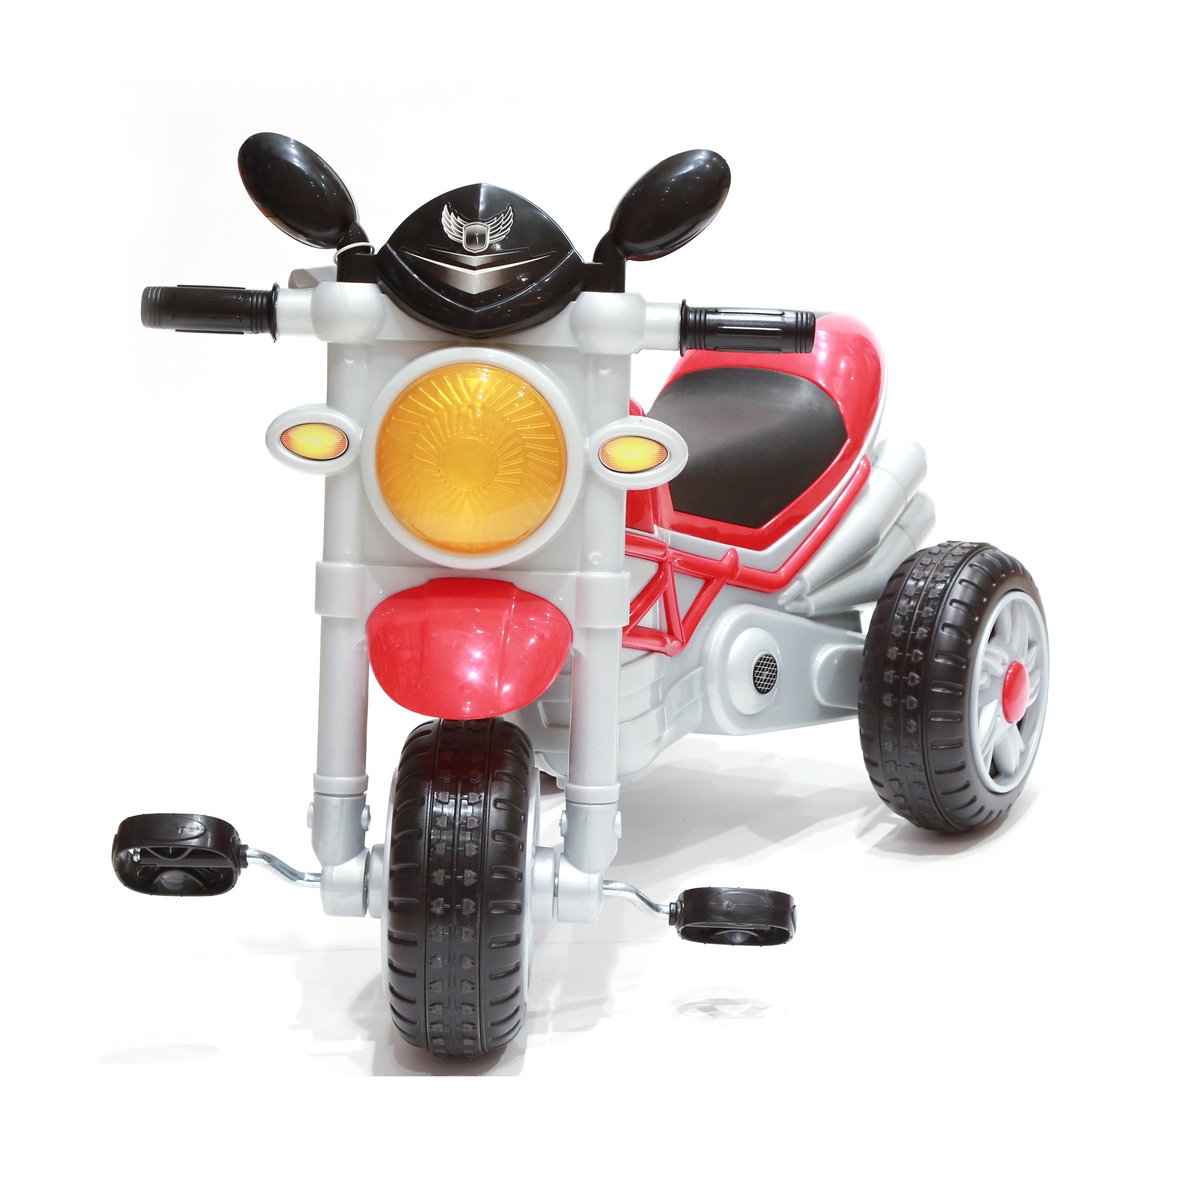 Skid Fusion Tricycle 221 Assorted Colors